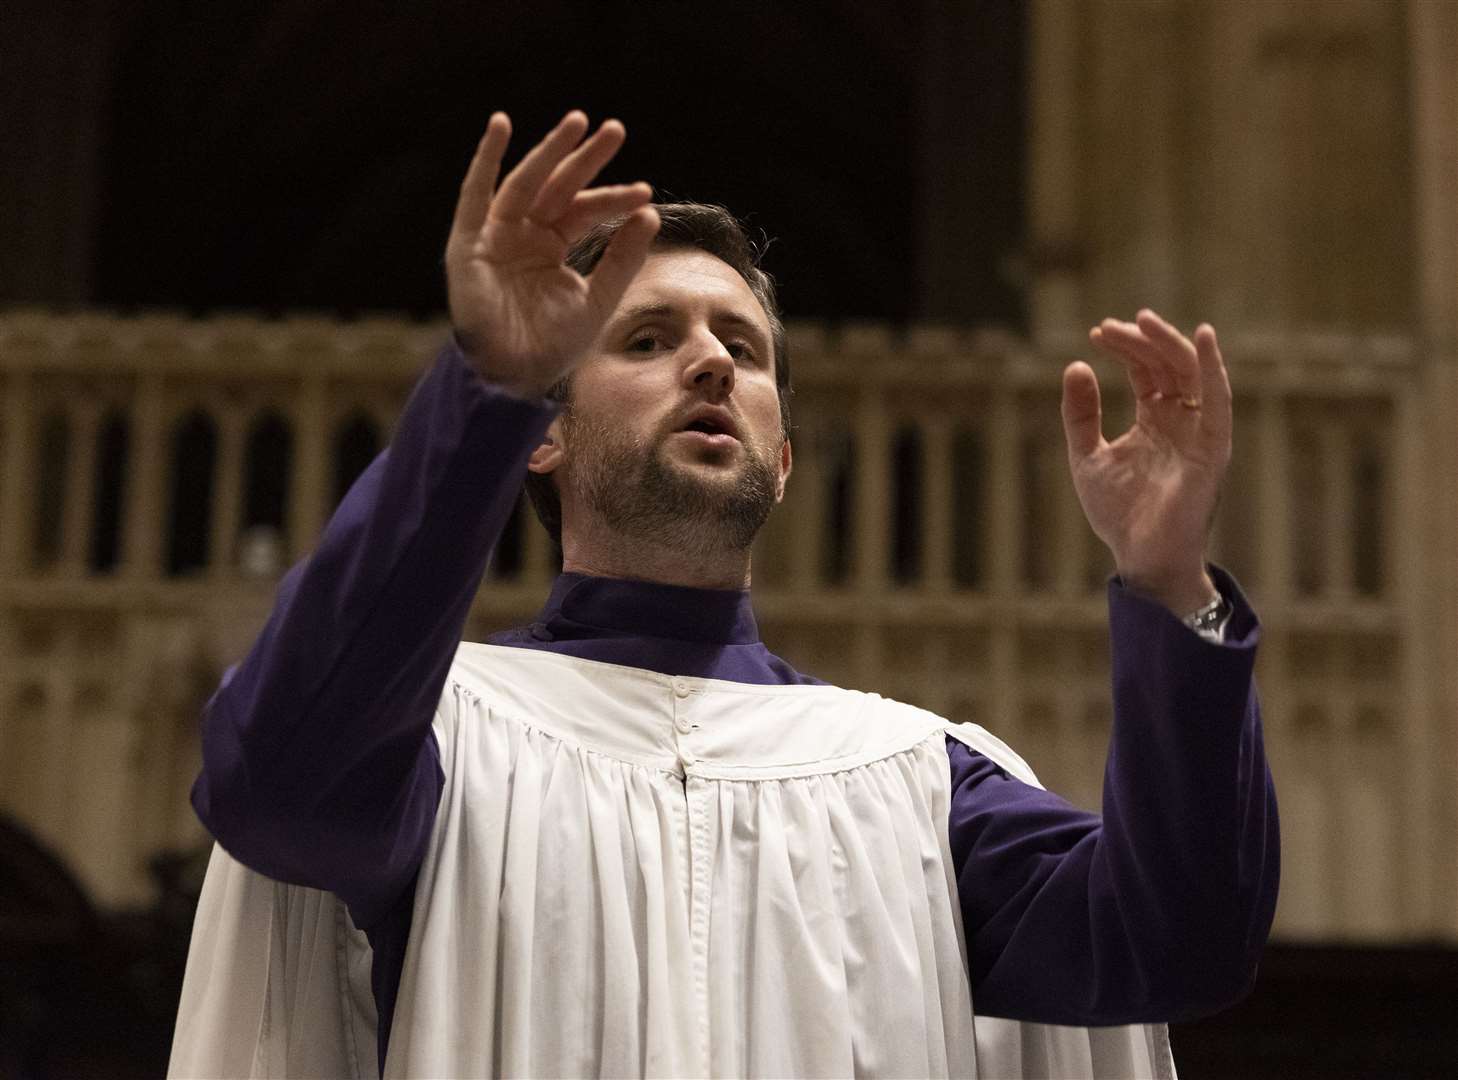 Canterbury Cathedral bosses say the changes show they are “committed to progressing equality”